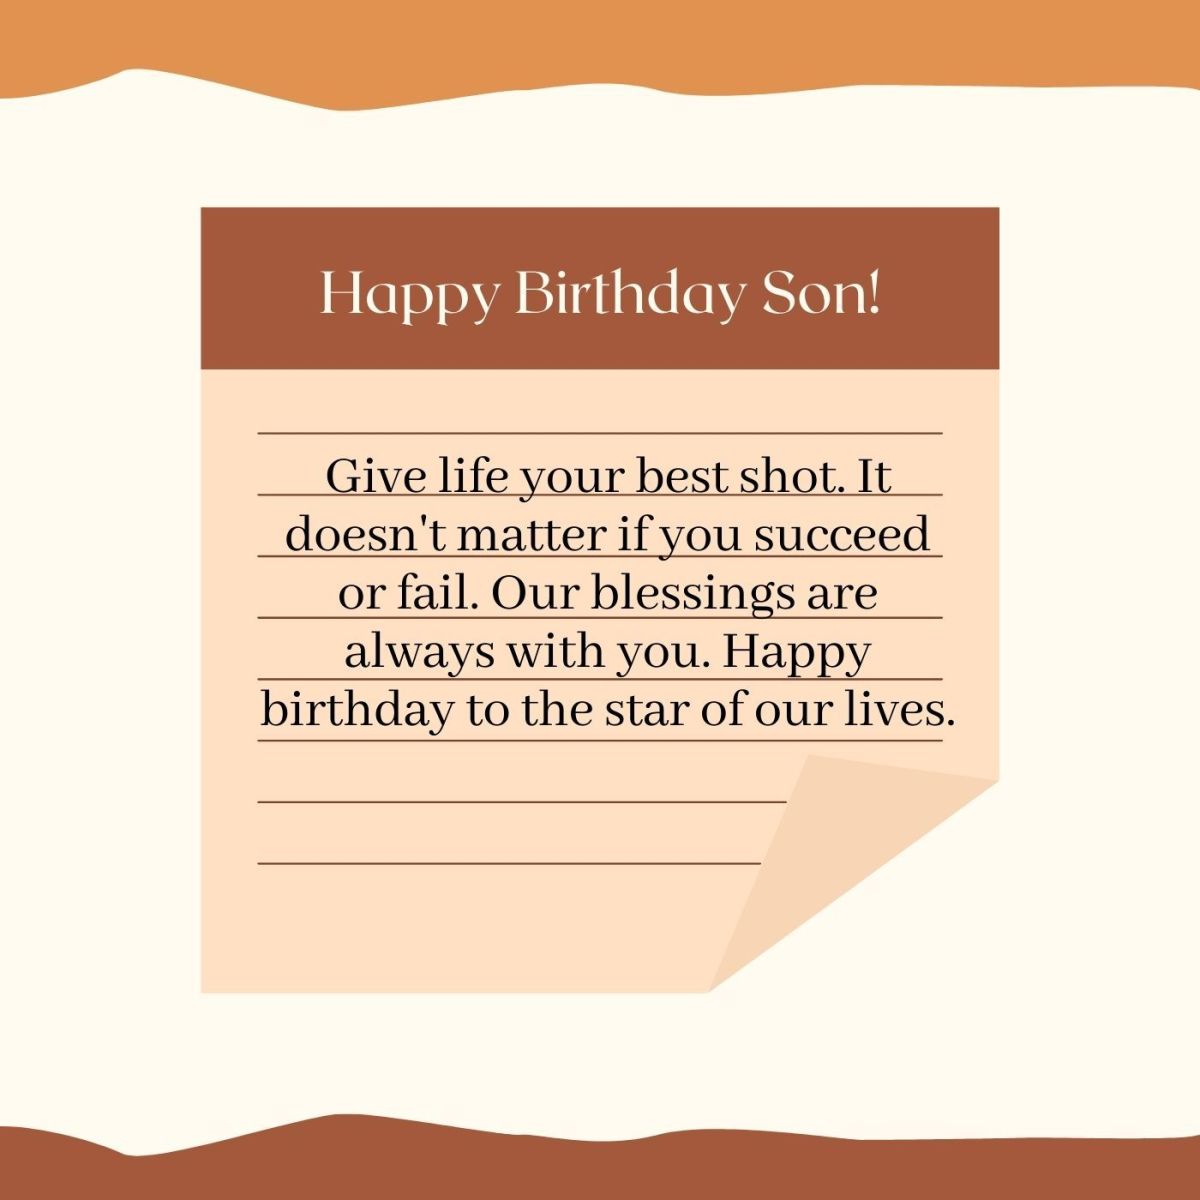 Happy Birthday Wishes for a Son: Quotes, Messages, and Poems ...